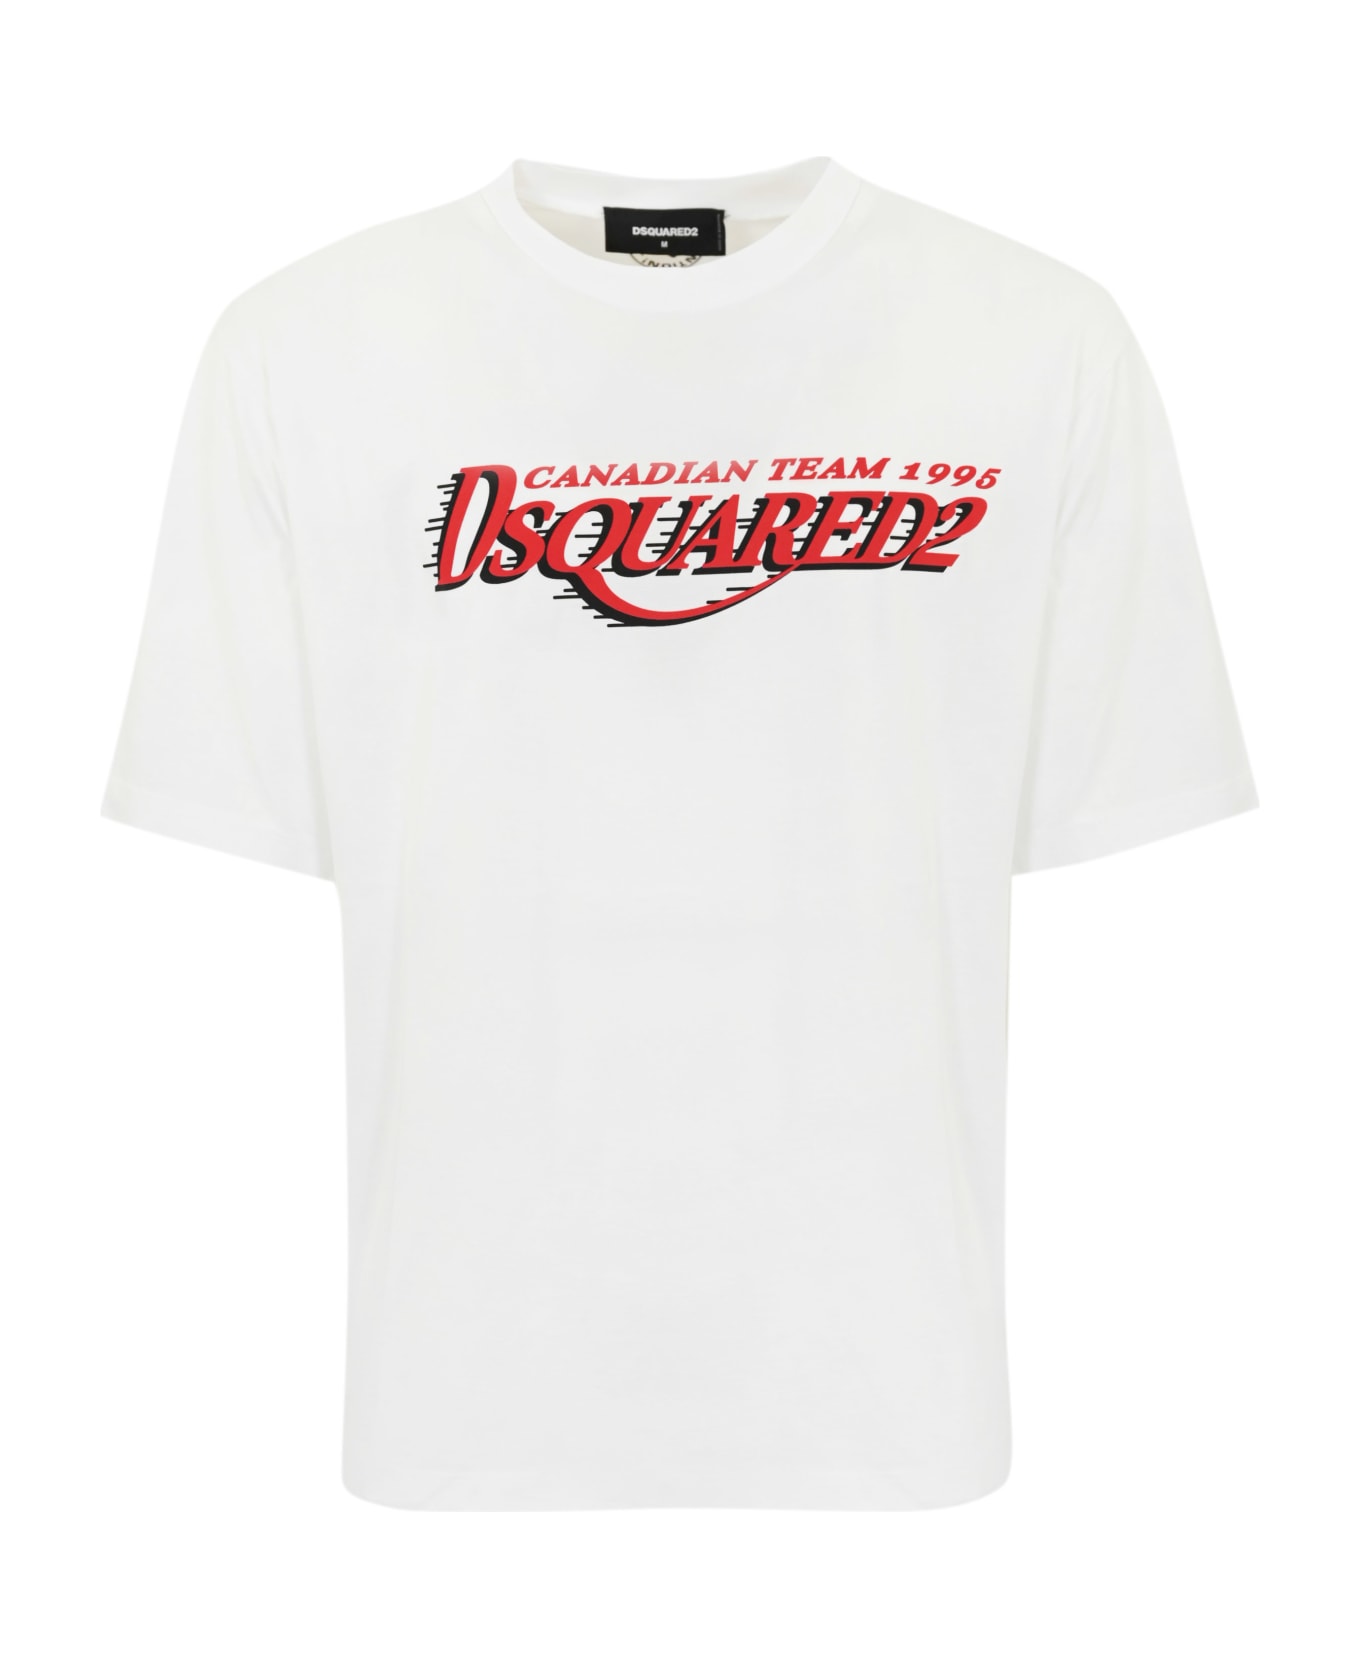 Dsquared2 Canadian Team T-shirt - White